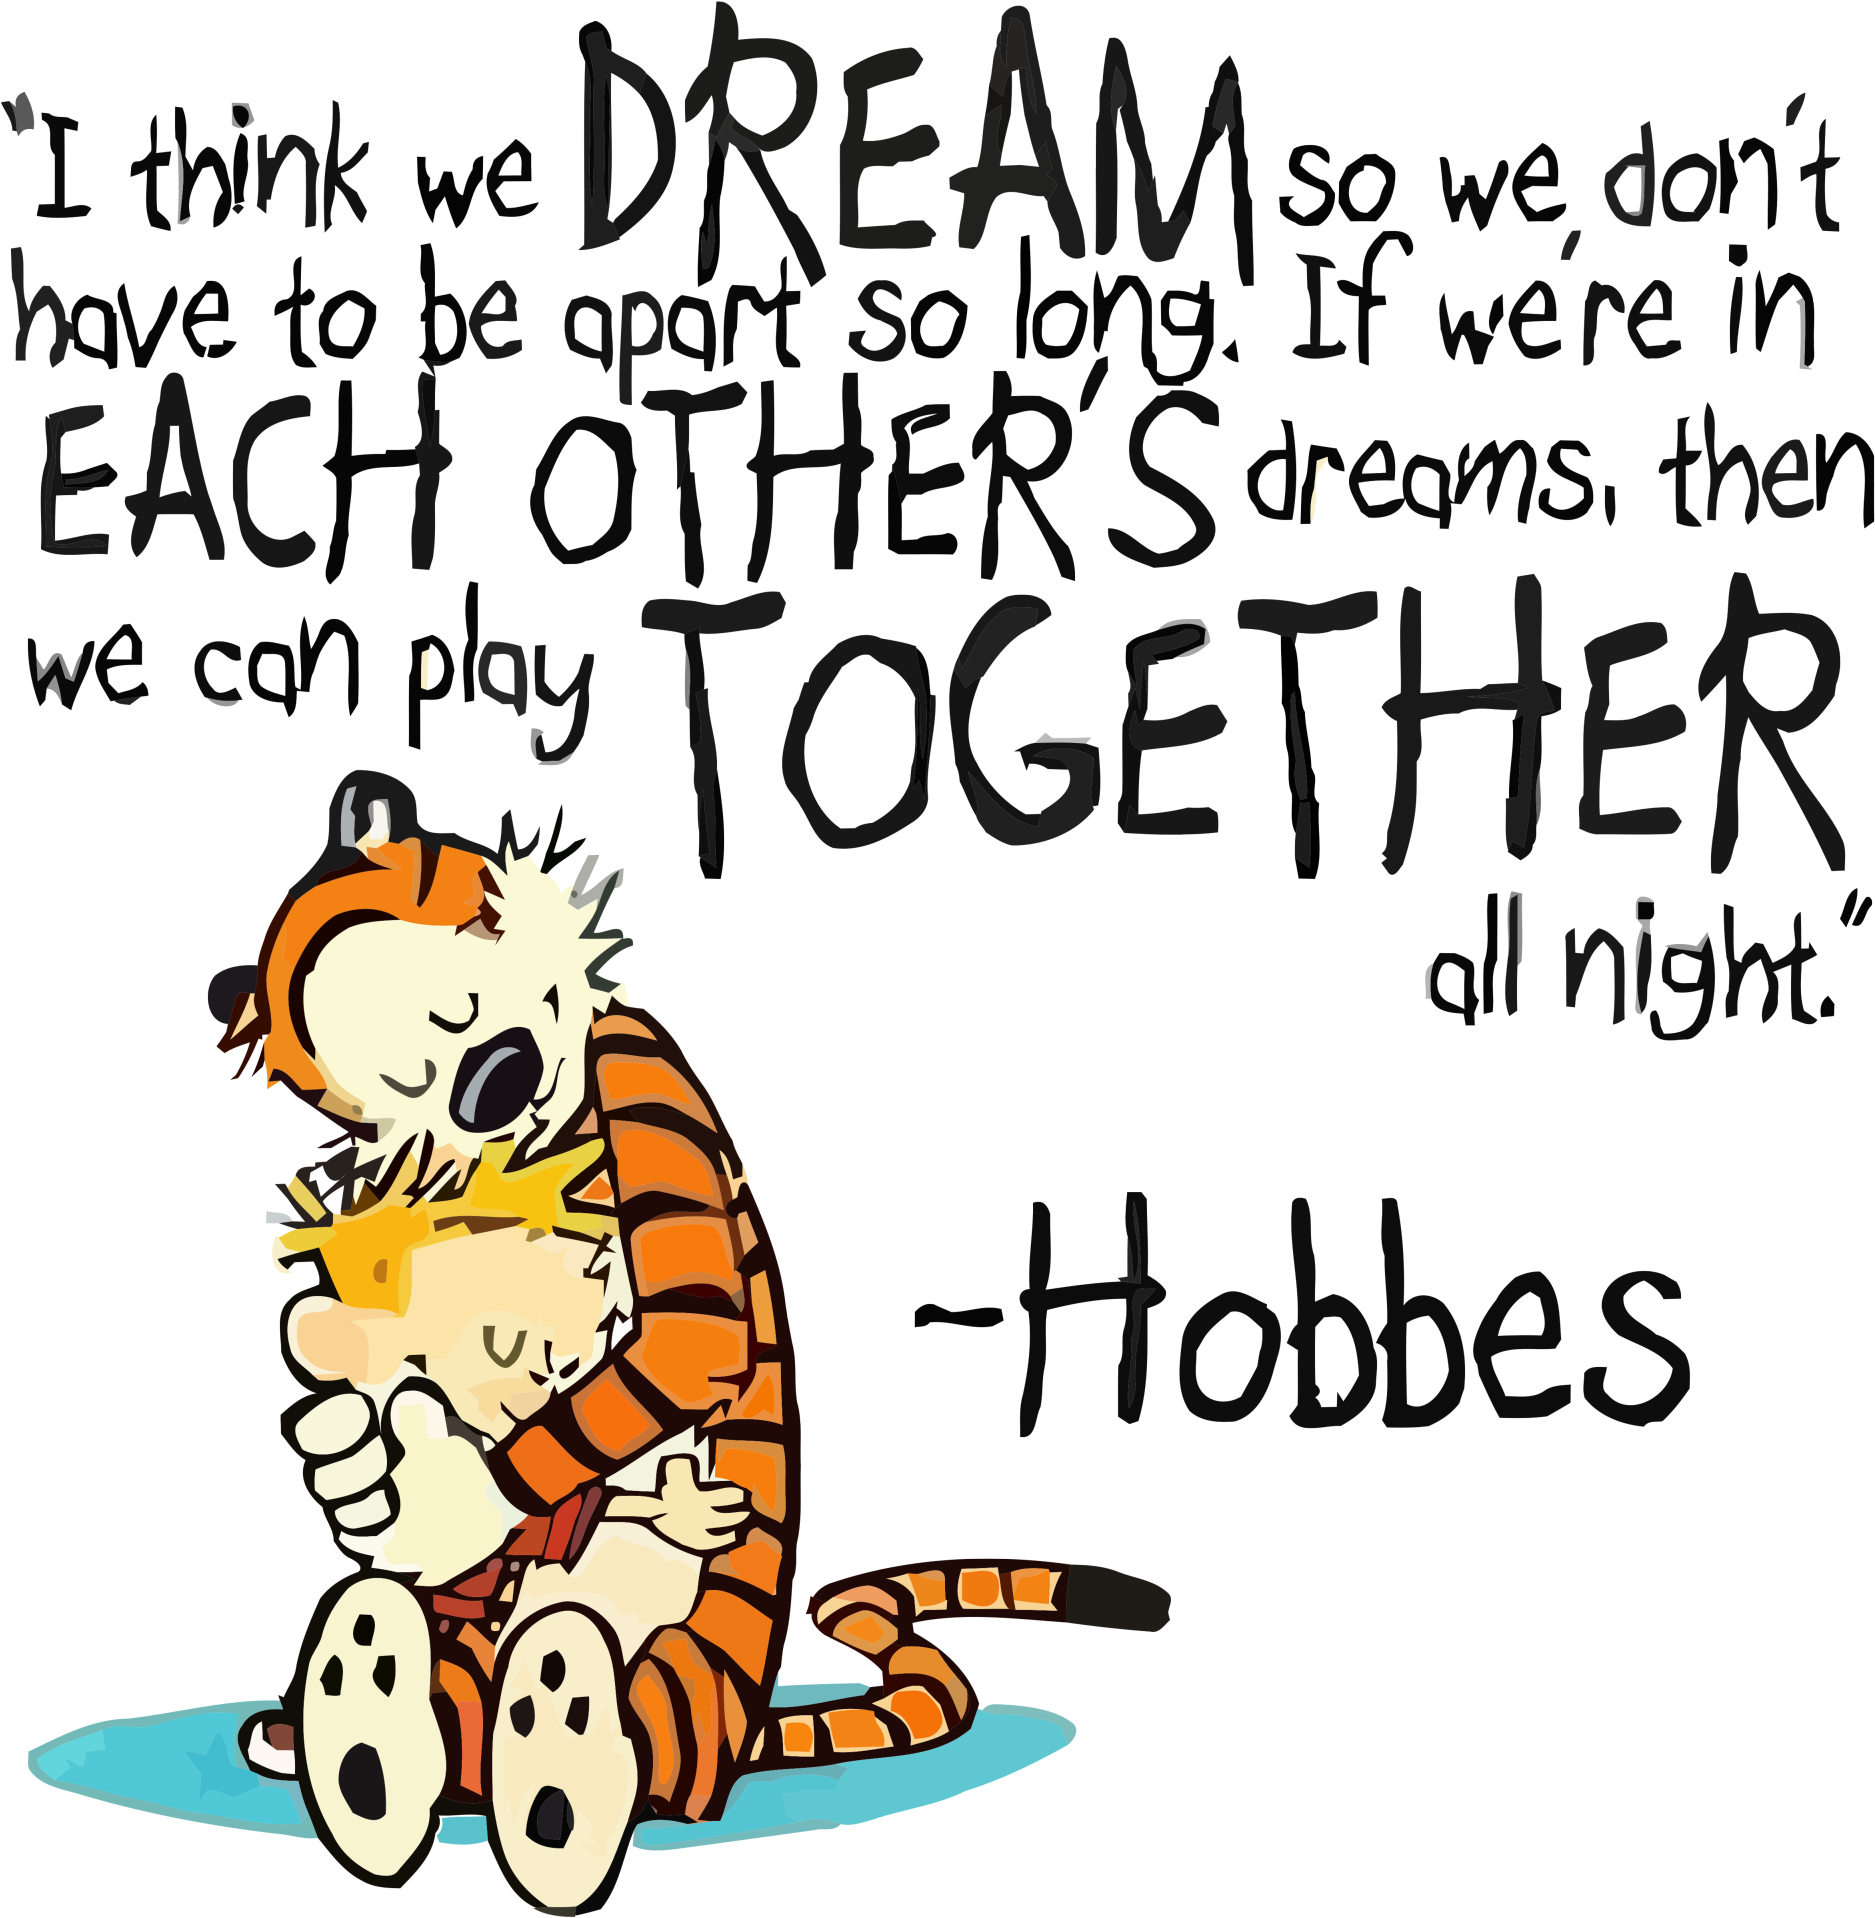 Calvinand Hobbes Dreaming Together